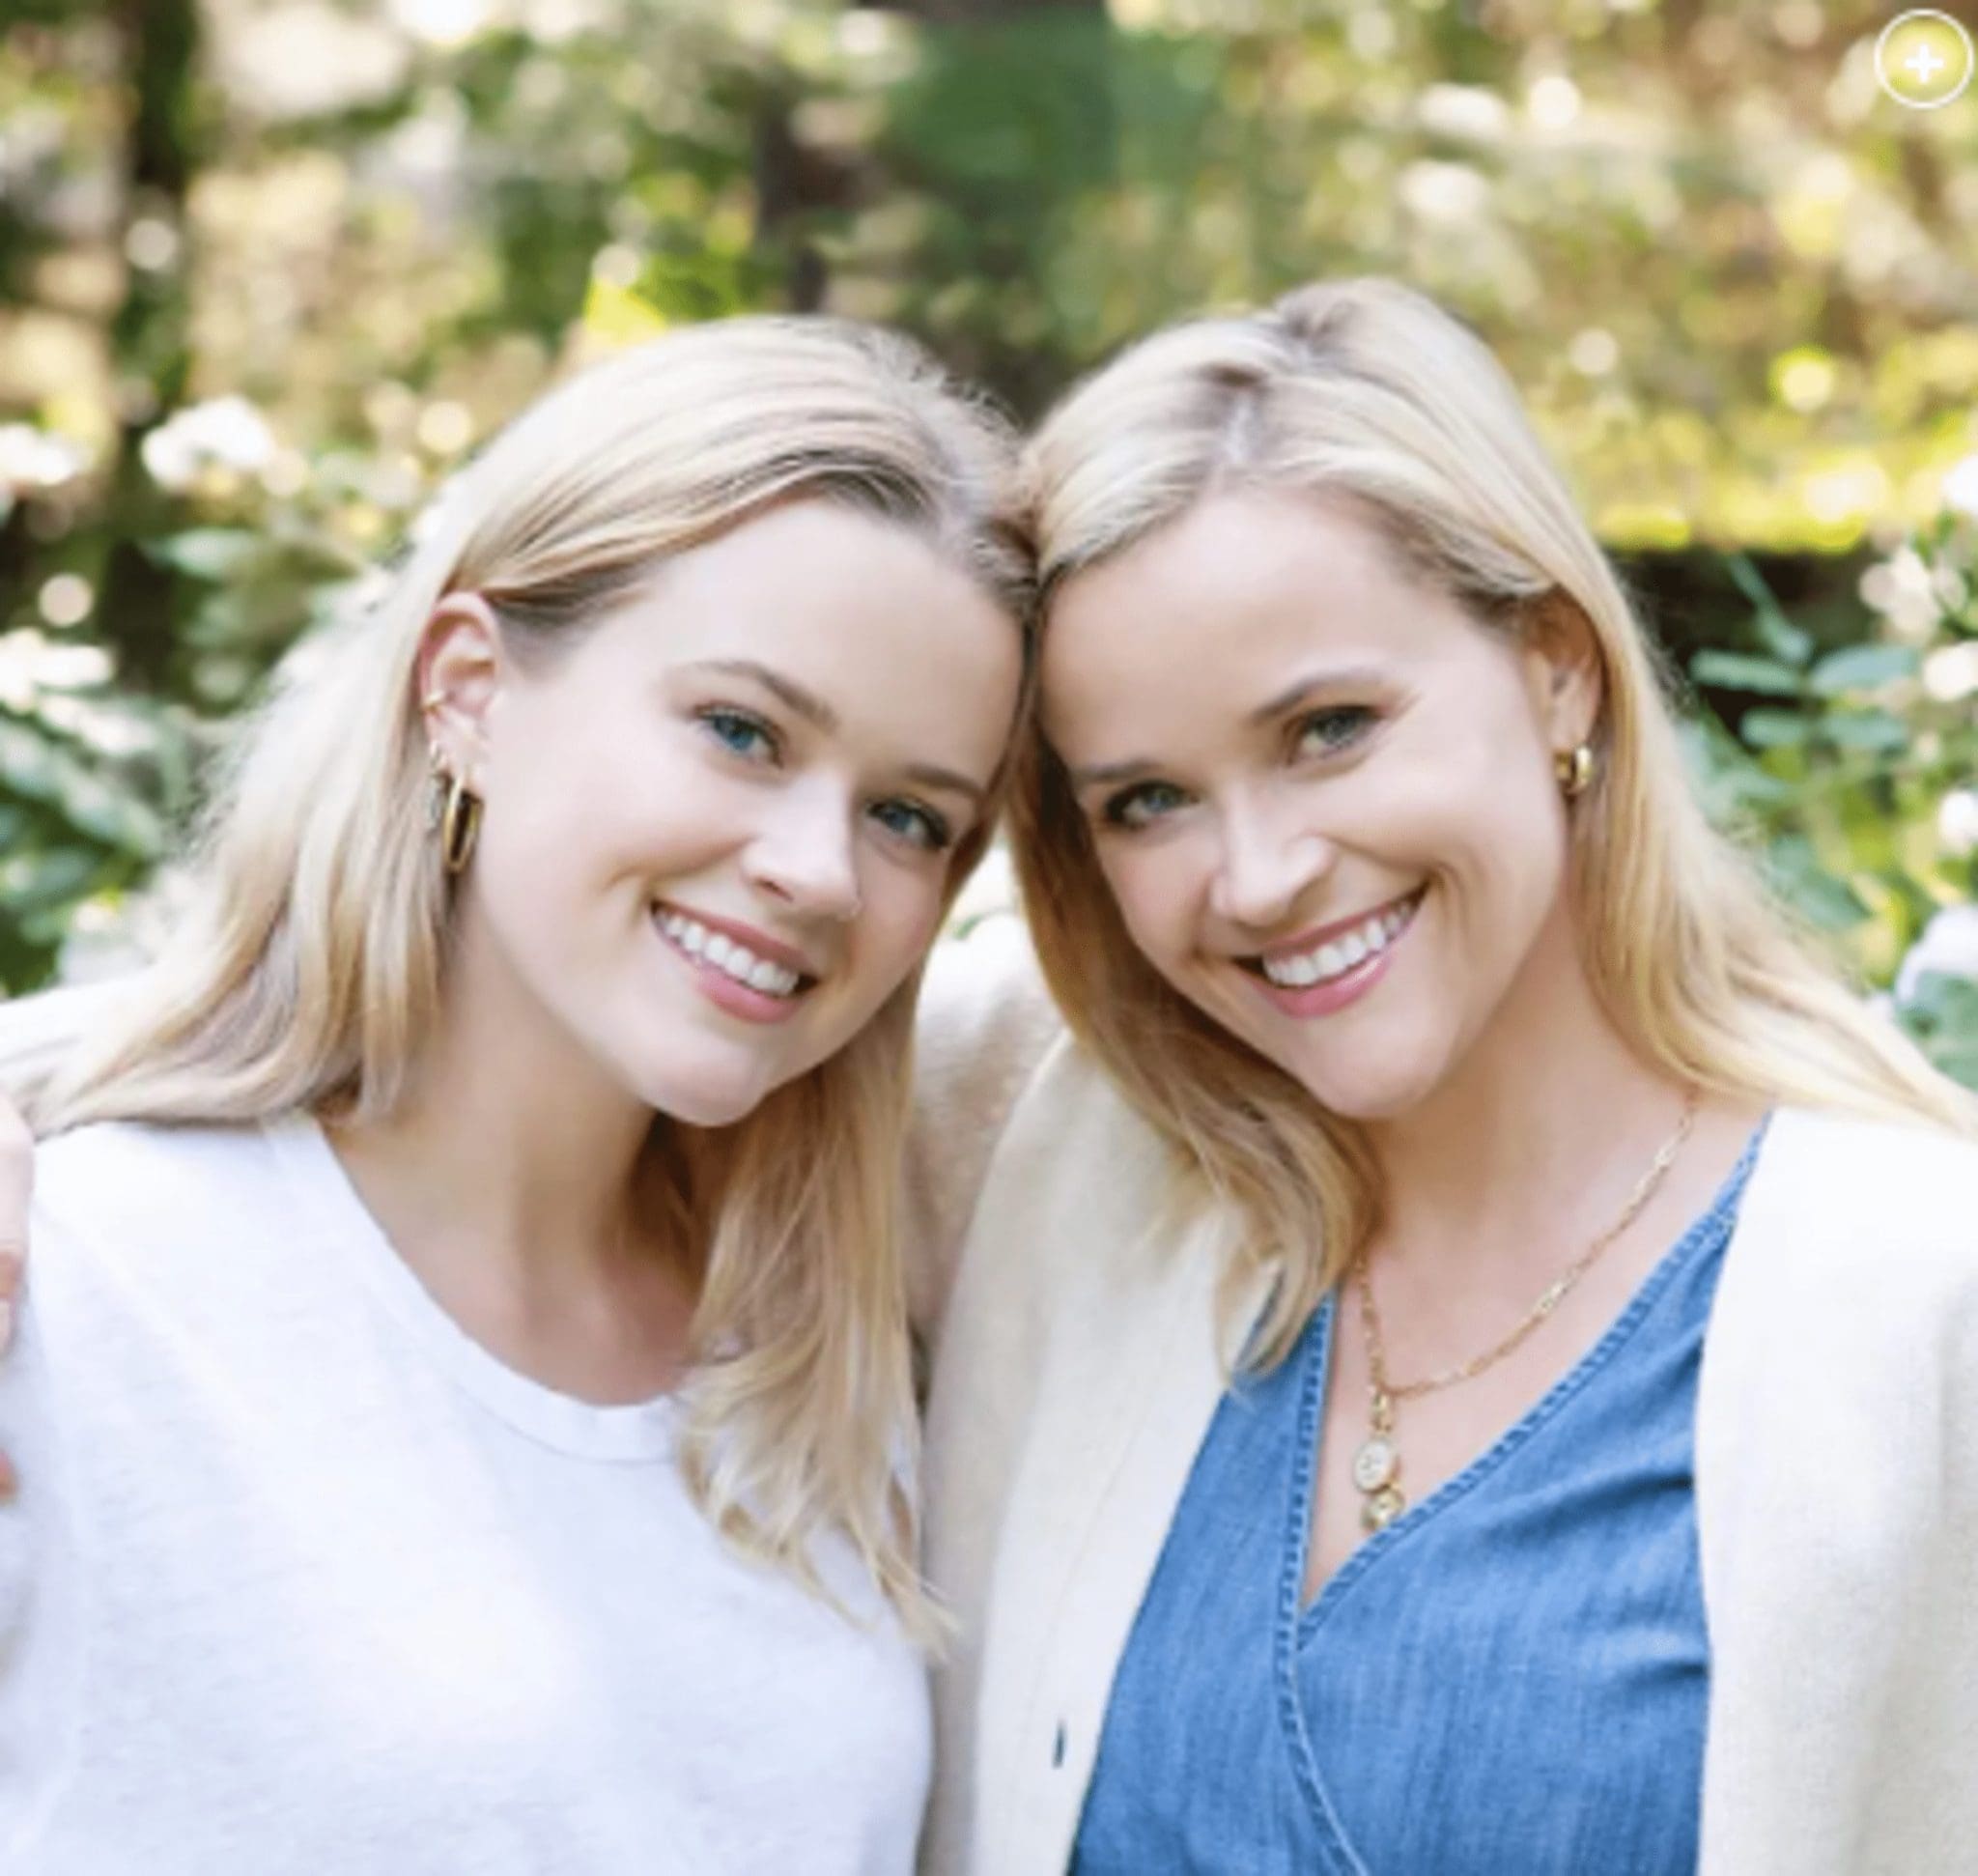 Even Reese Witherspoon and her daughter Ava Phillippe, she says, don't see the similarities.